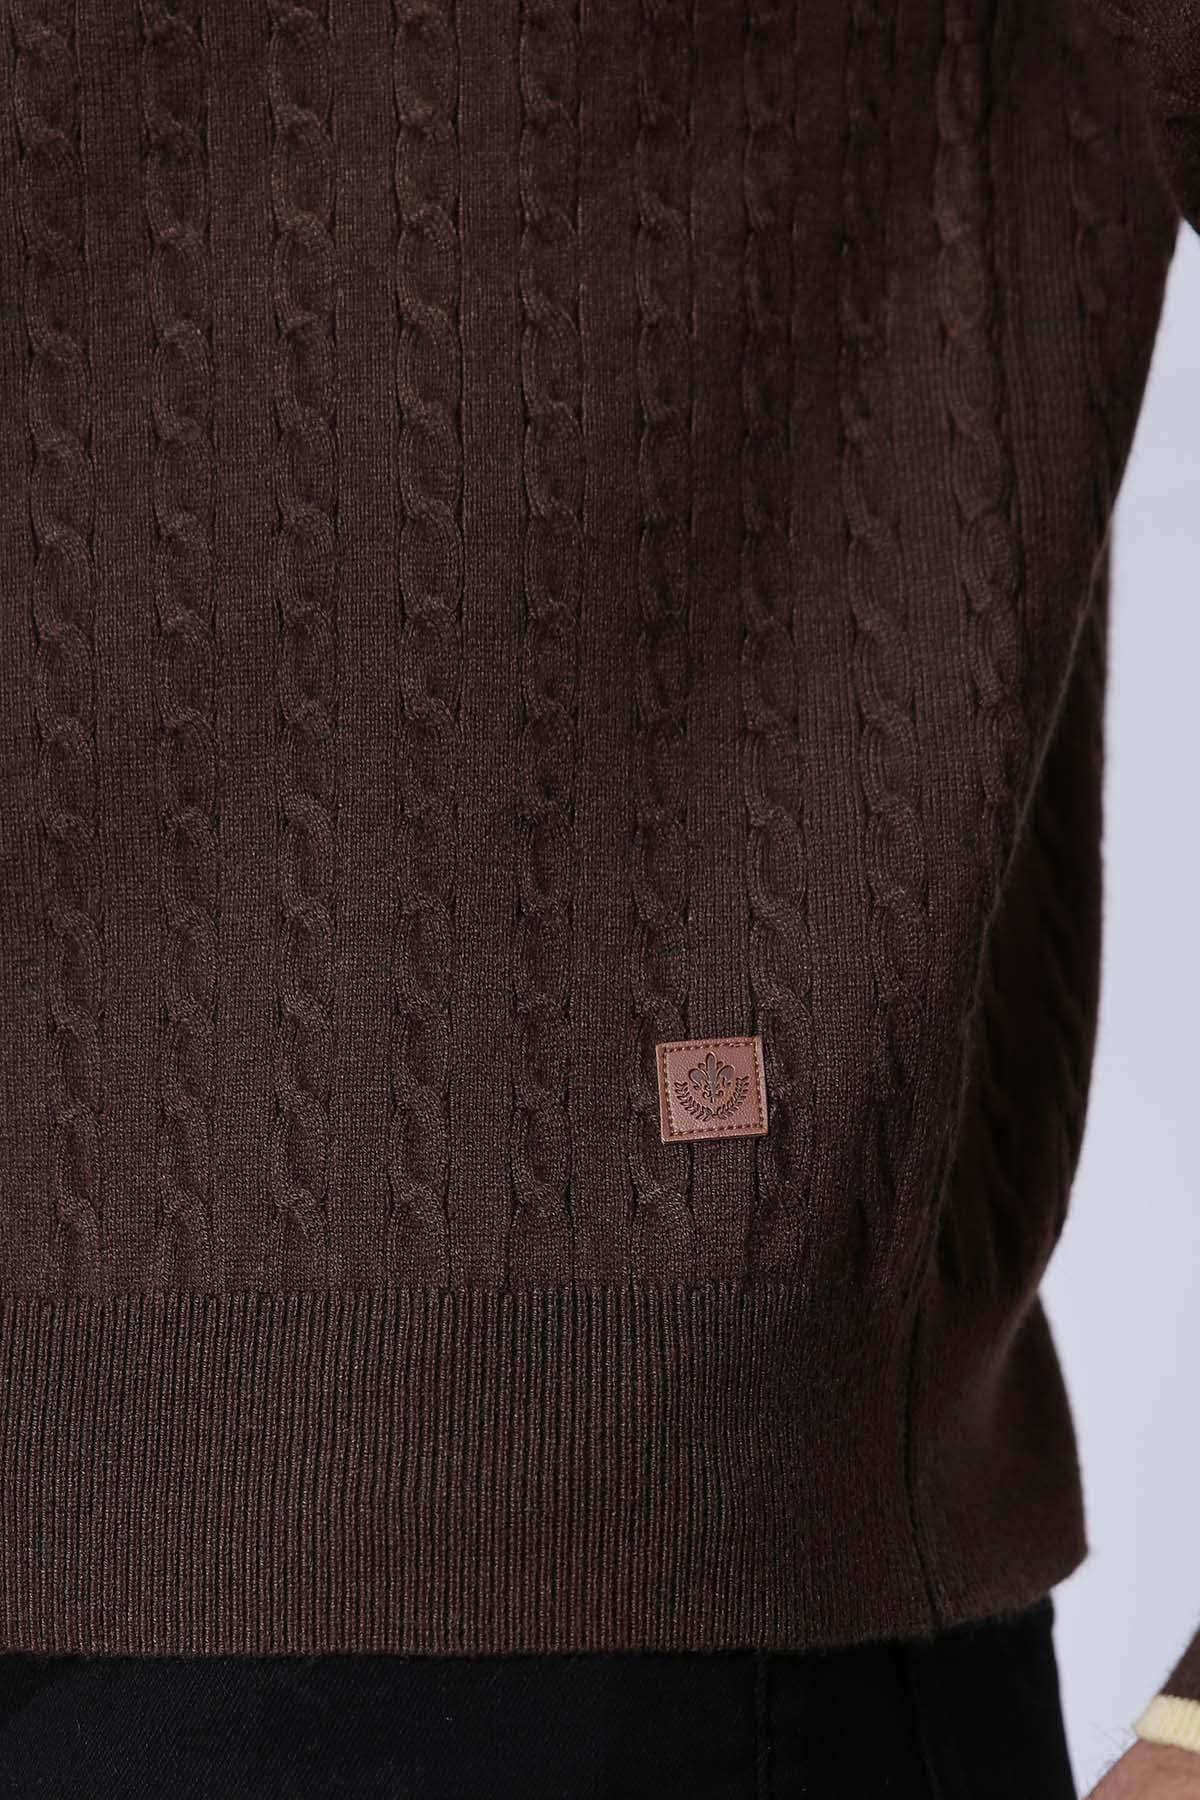 SWEATER ZIPPER FULL SLEEVE BROWN at Charcoal Clothing